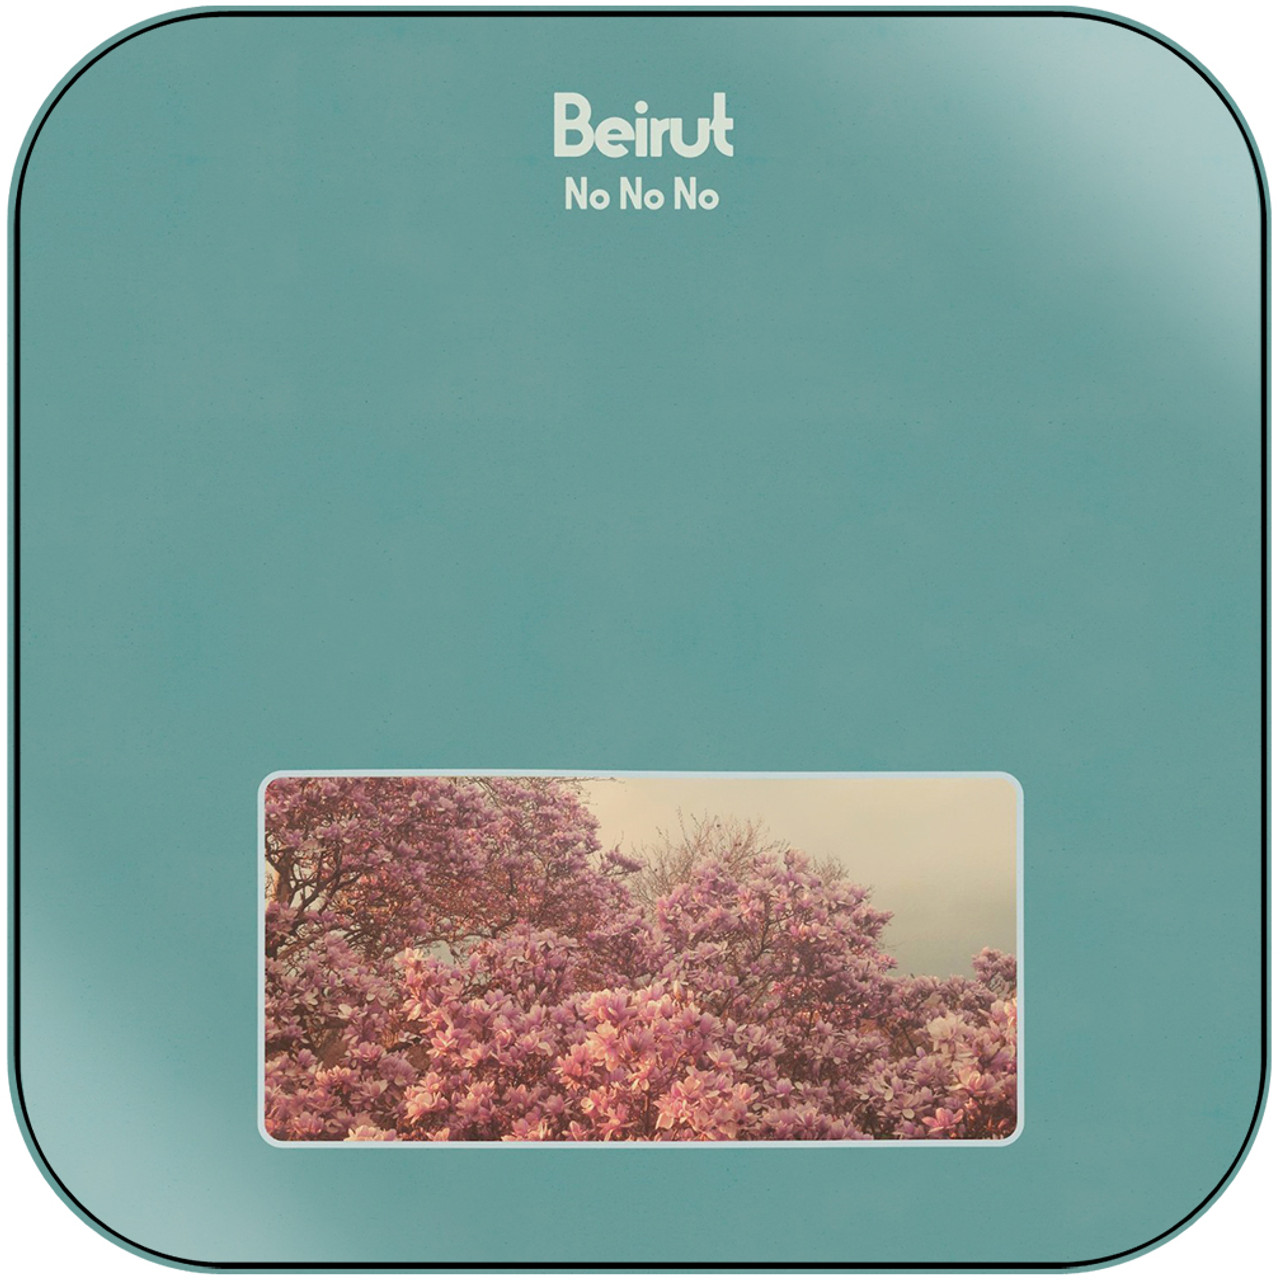 Beirut The Flying Club Cup Album Cover Sticker Album Cover Sticker